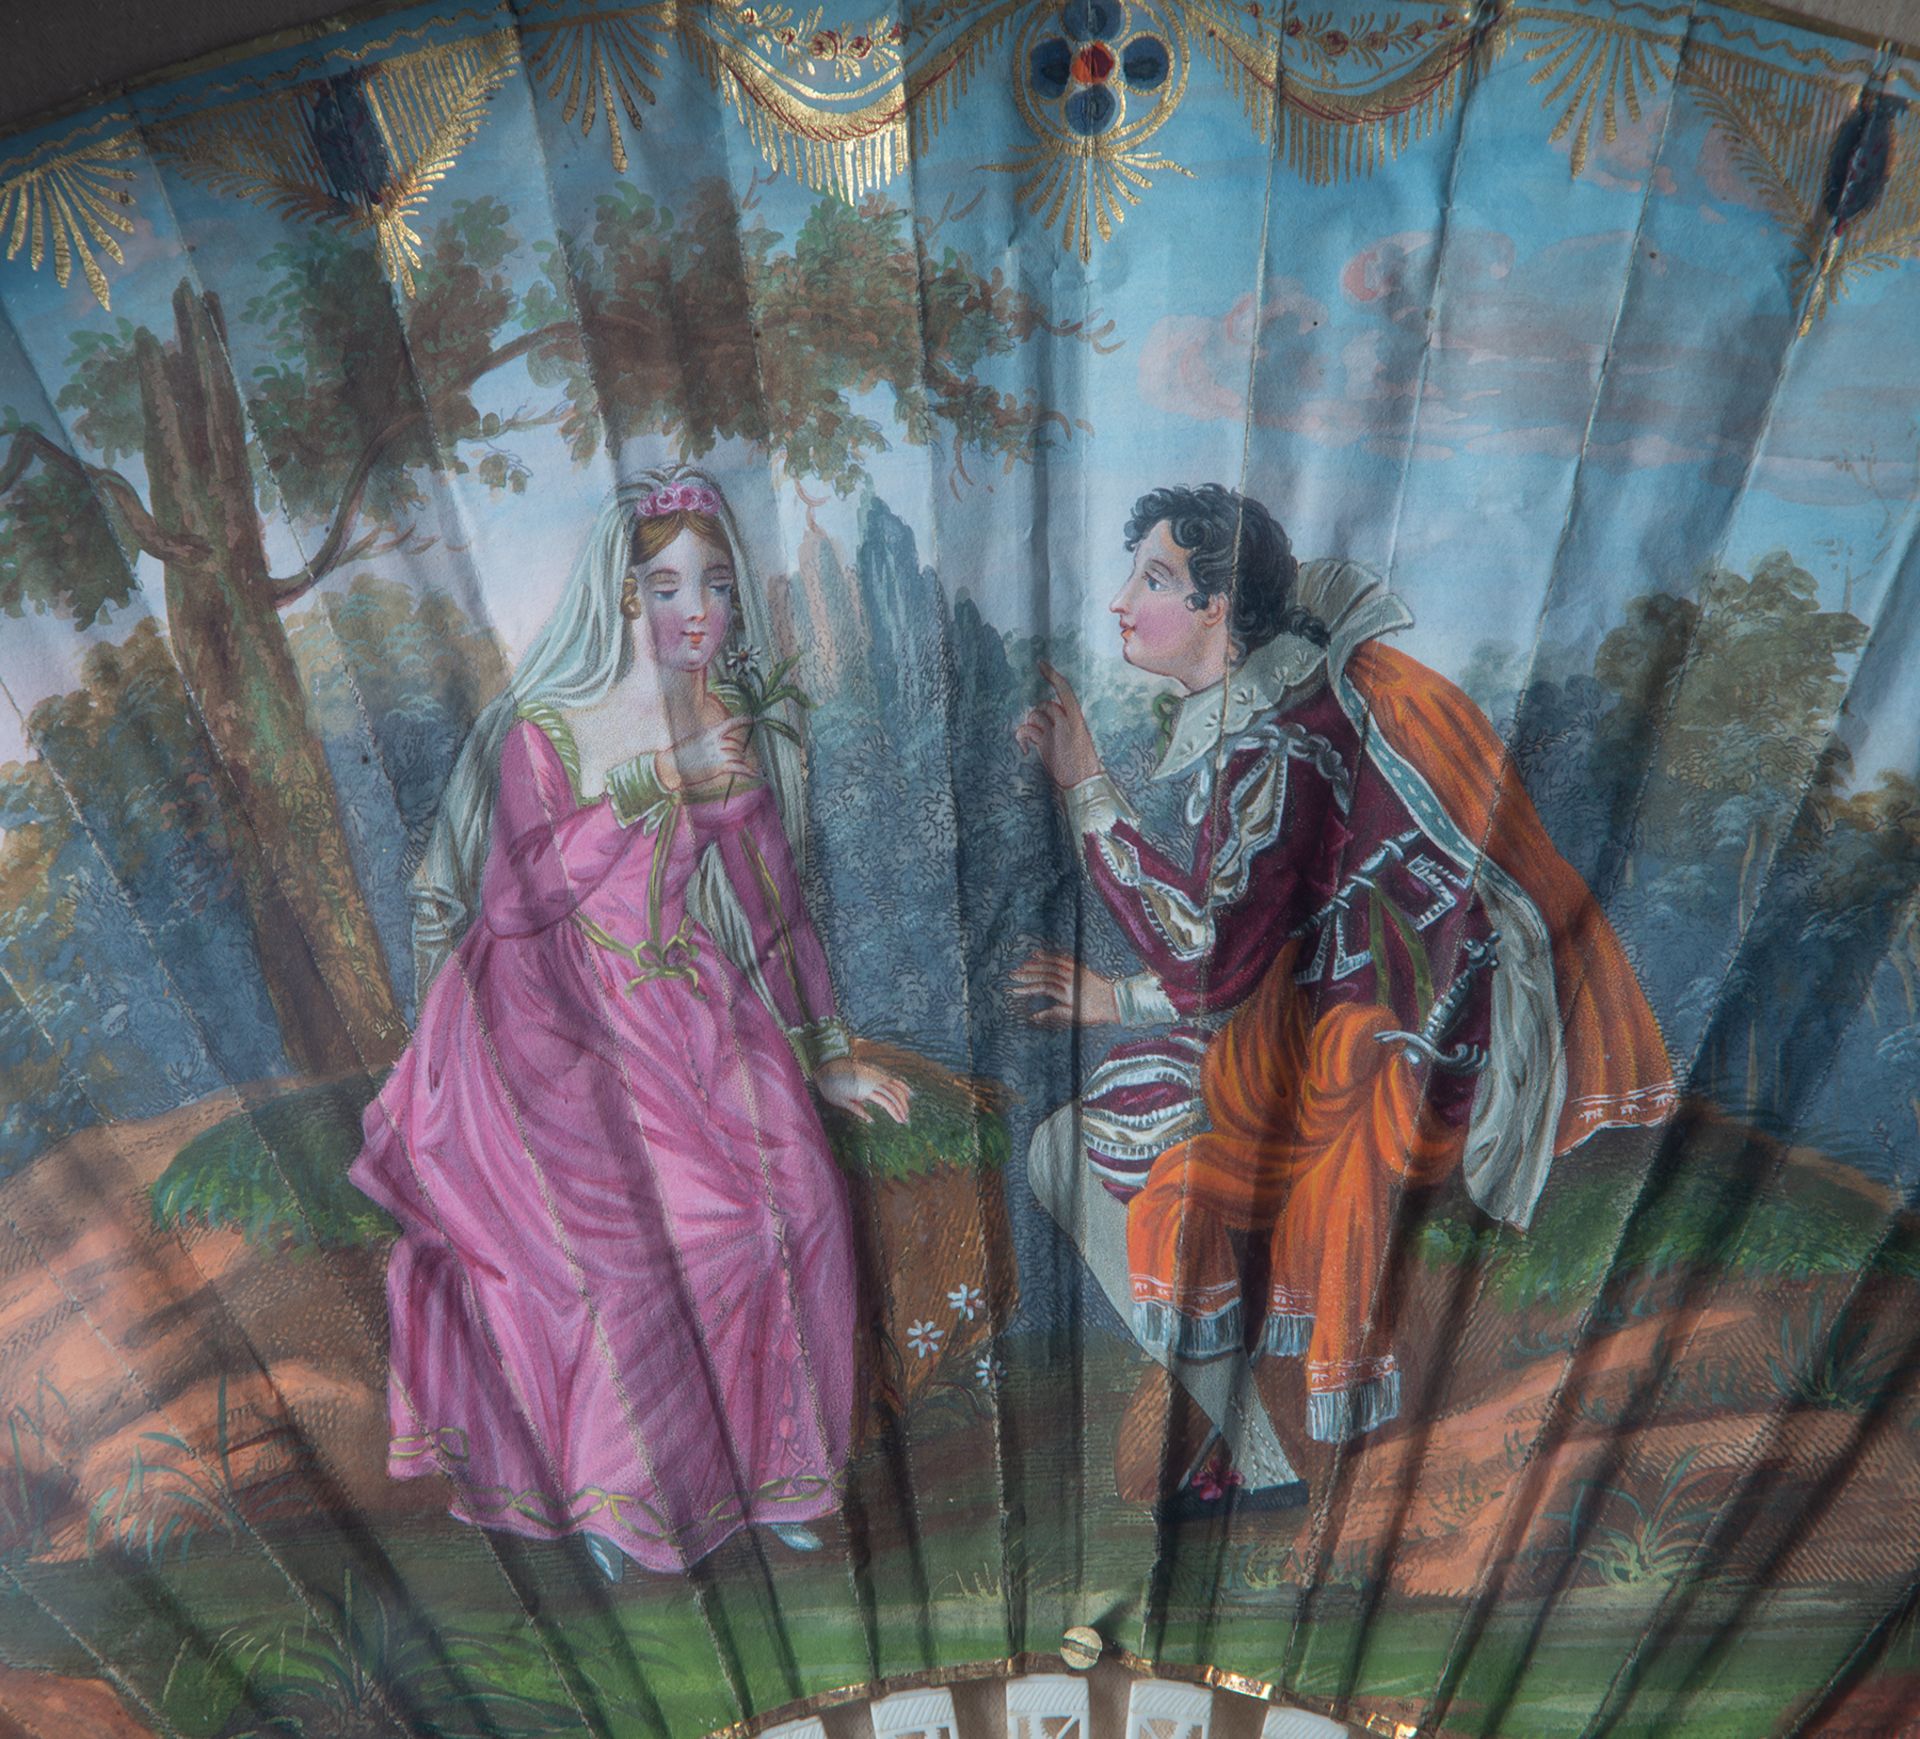 Fan with gallant scene of Romeo and Juliet hand painted in watercolor, 19th century - Image 2 of 3